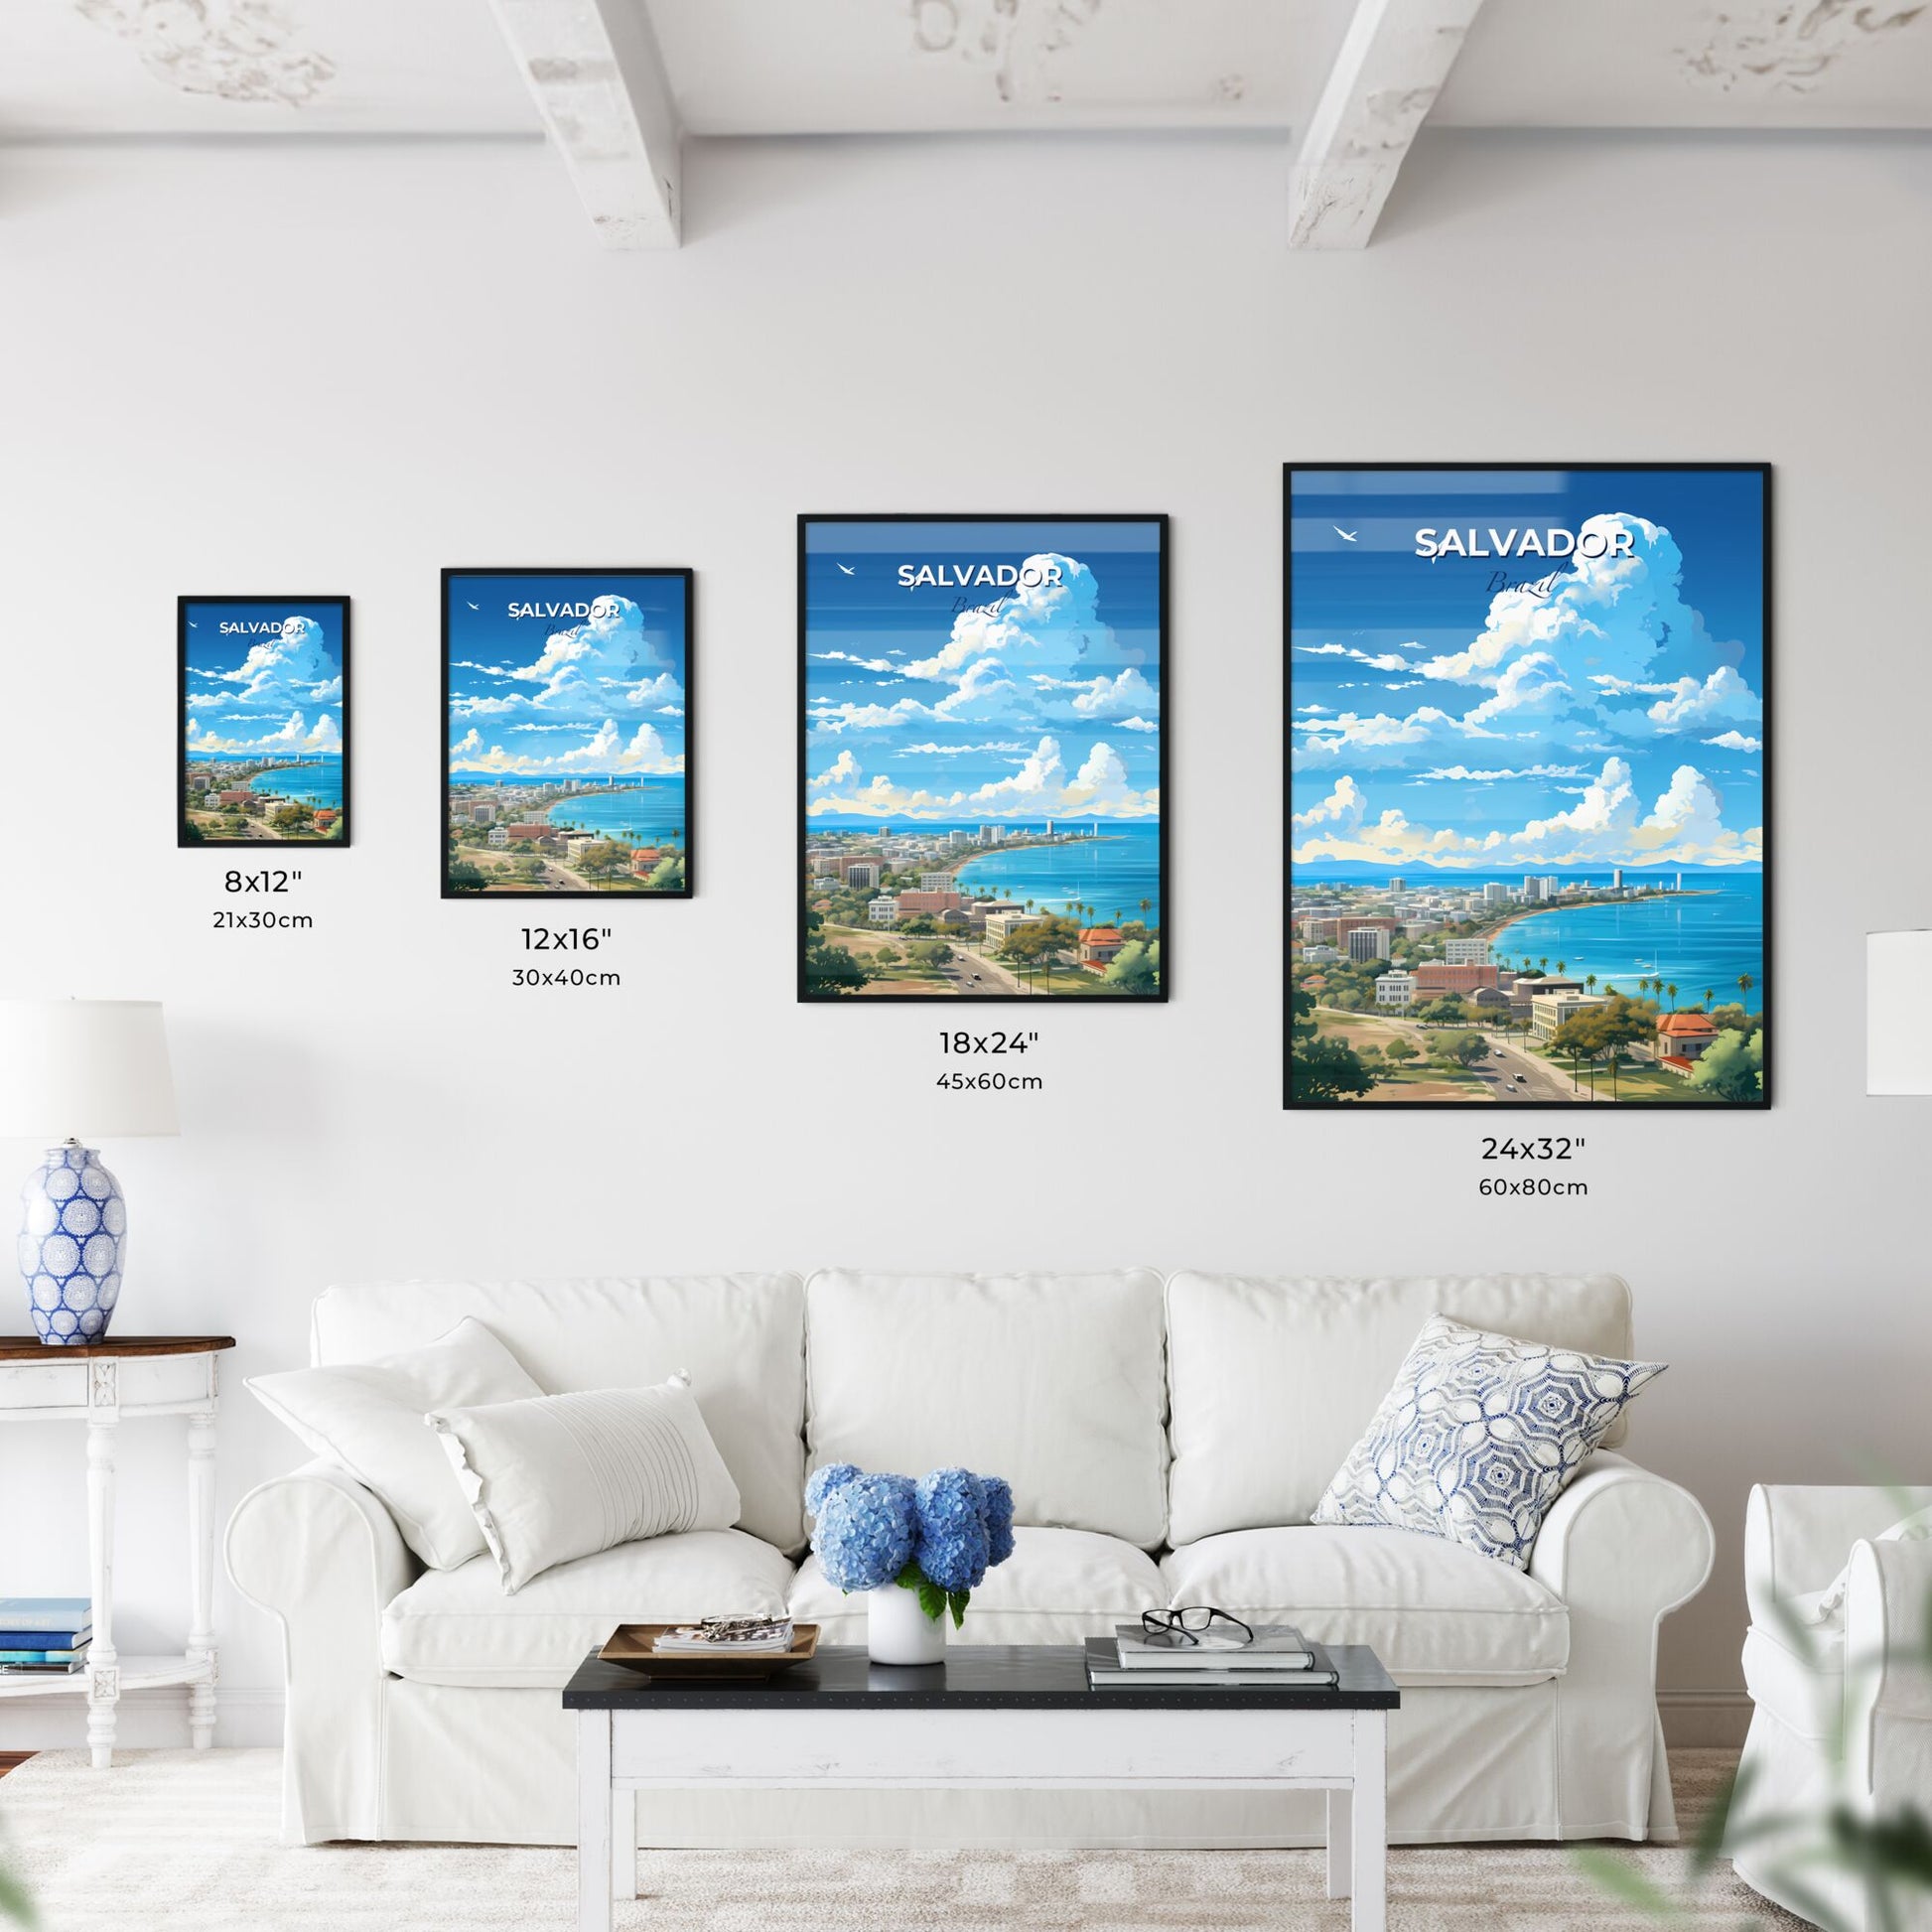 Salvador Brazil Skyline - A City Next To The Water - Customizable Travel Gift Default Title